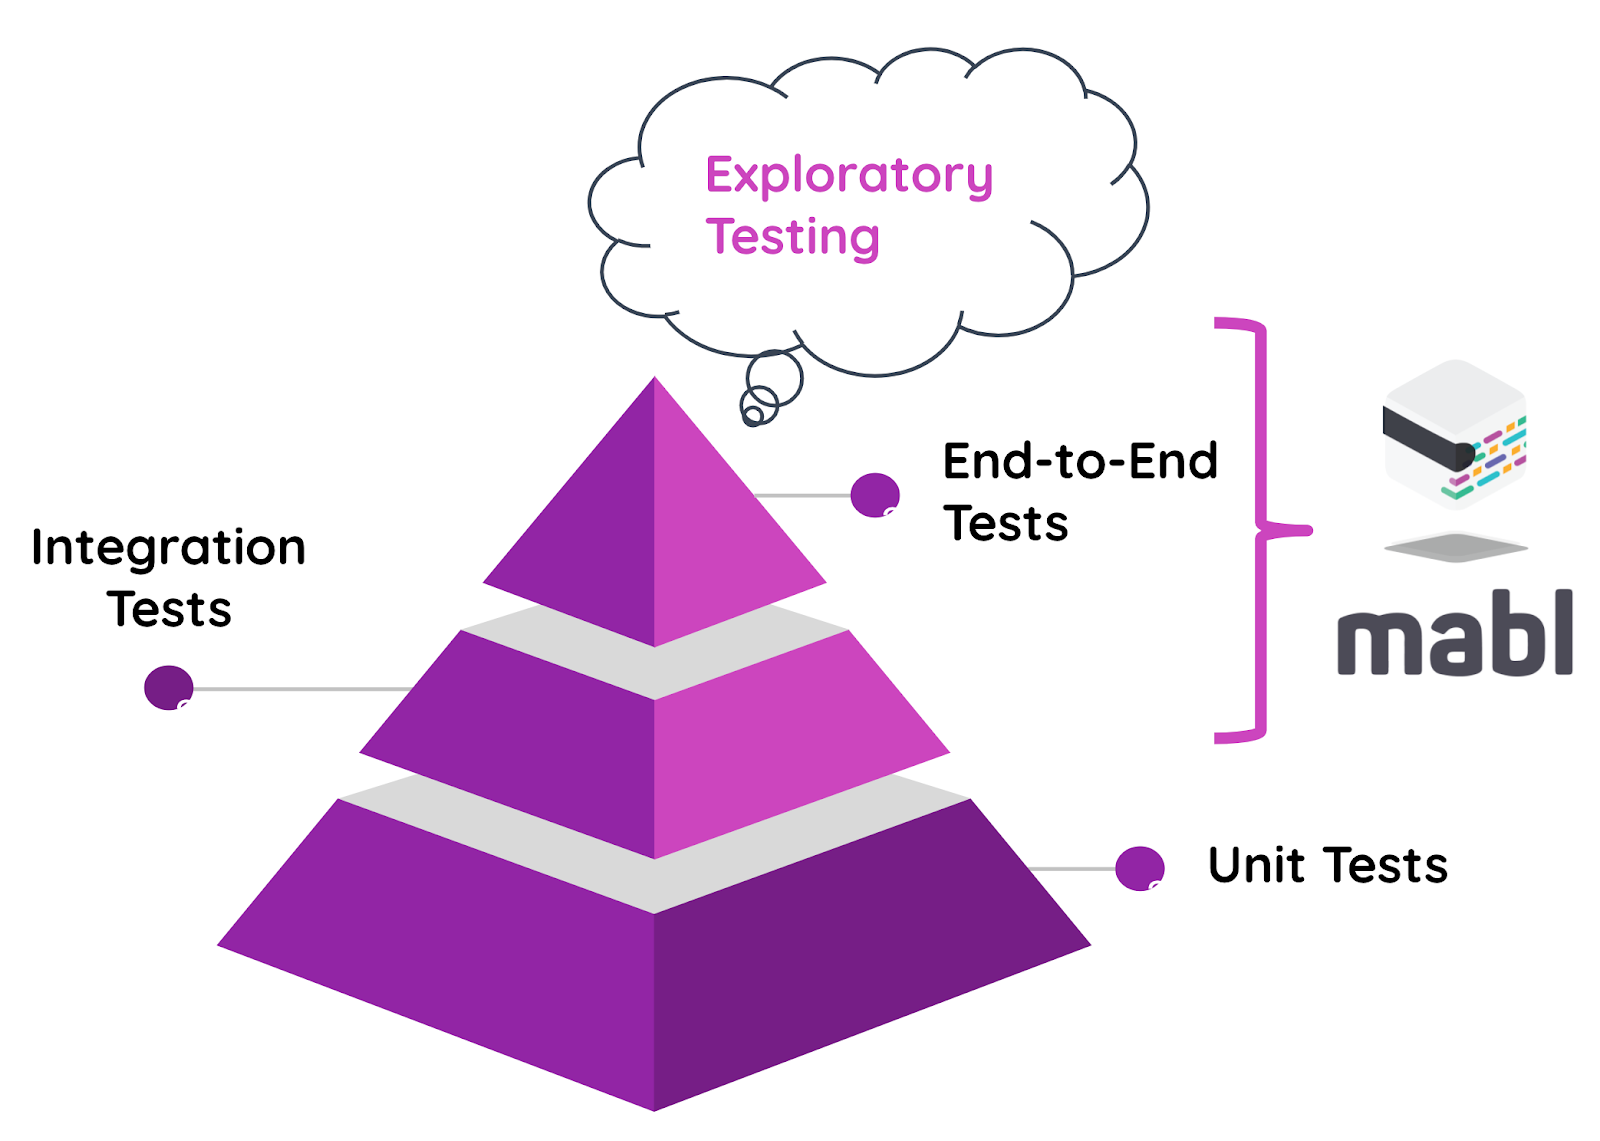 A diagram showing how to apply mabl to the testing pyramid.